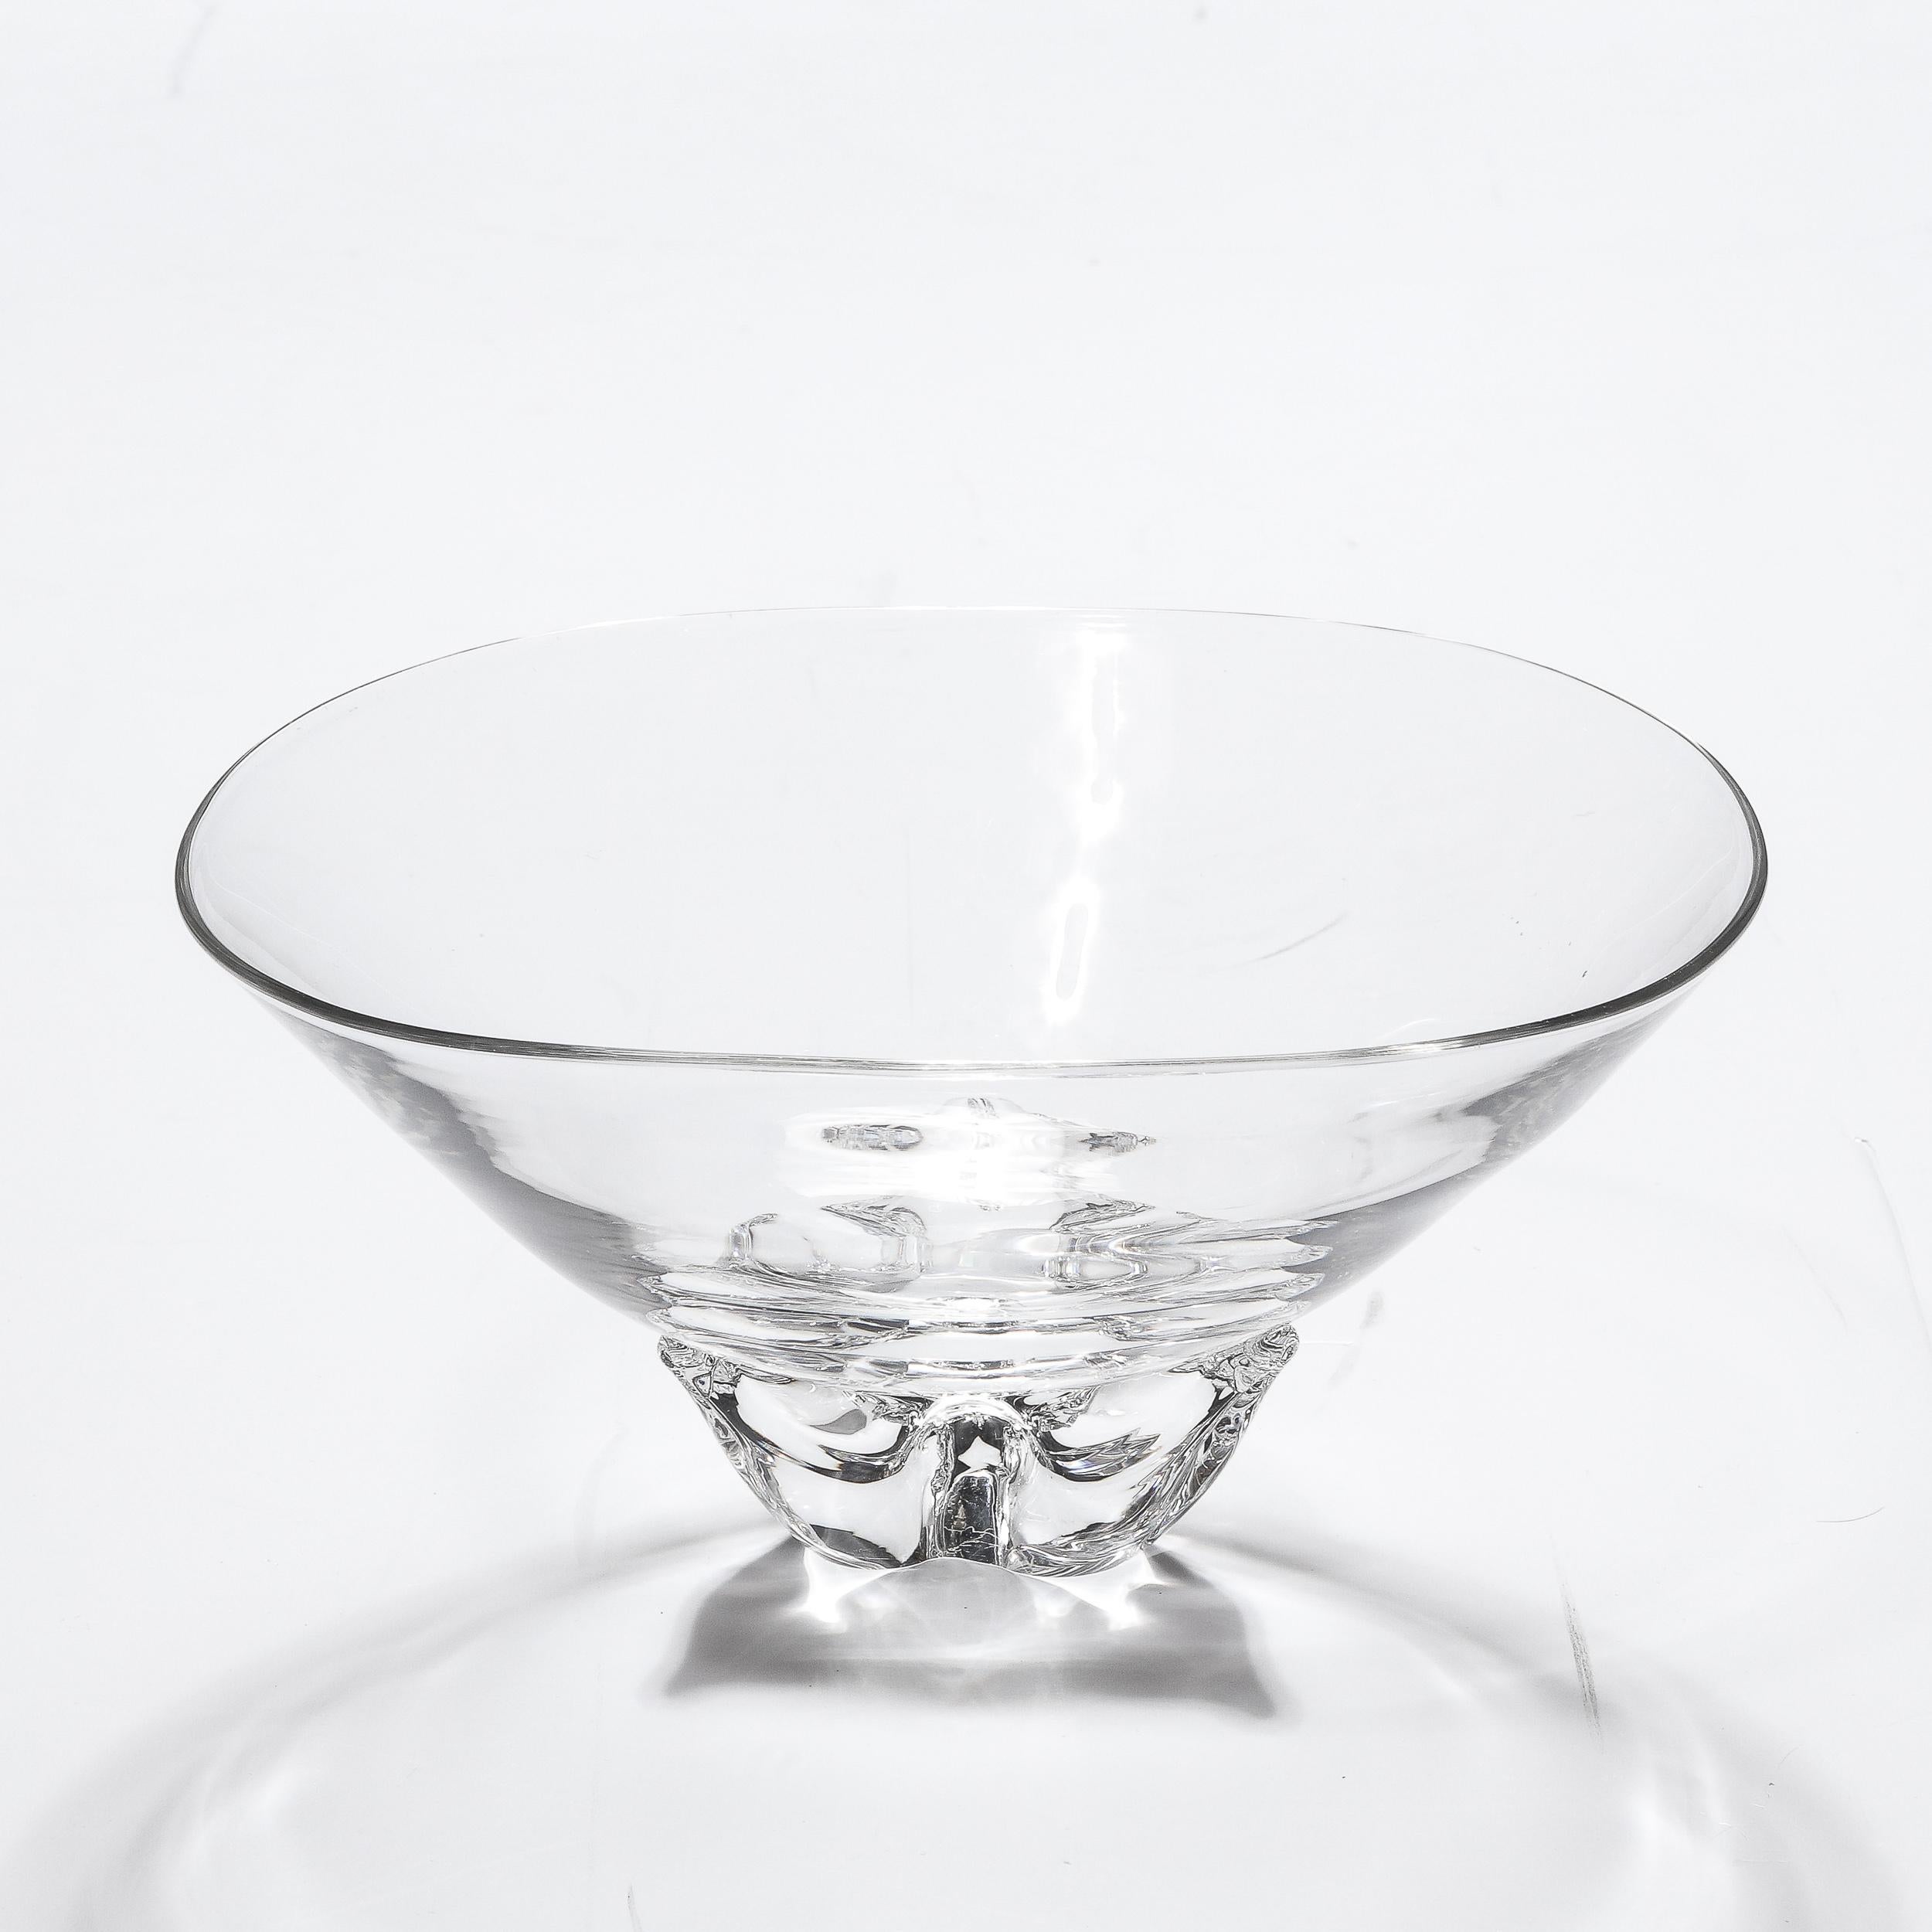 Mid-20th Century Mid-Century Modernist Hand-Blown Glass Bowl with Organic Base Signed Steuben For Sale